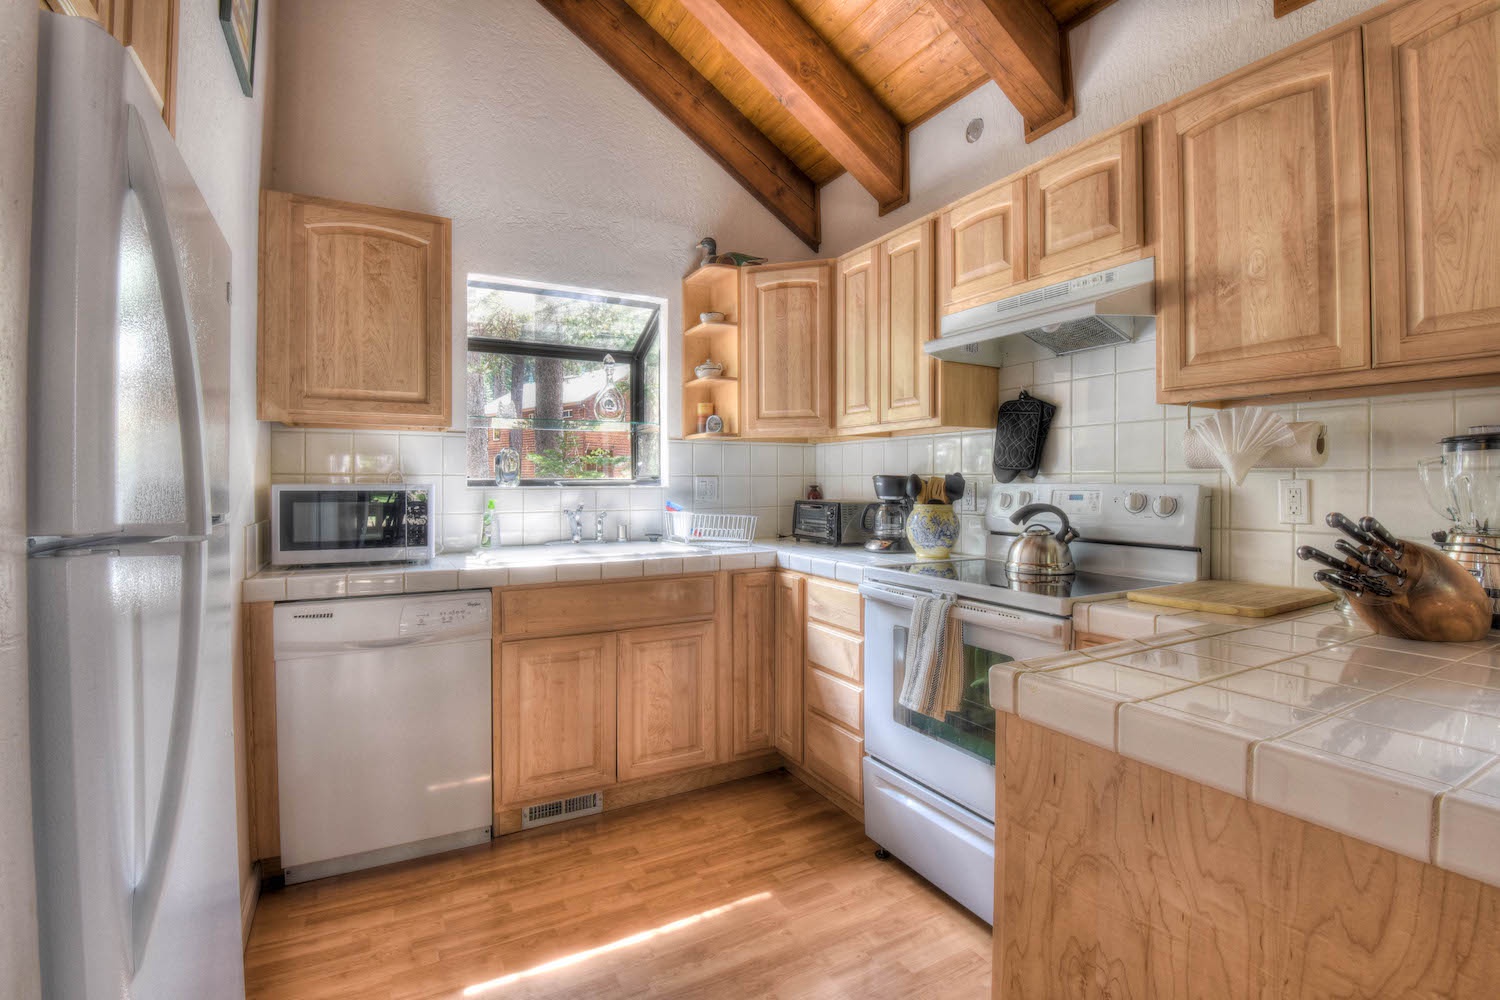 Full kitchen w/ electric stove top, blender, coffee maker, toaster and more!